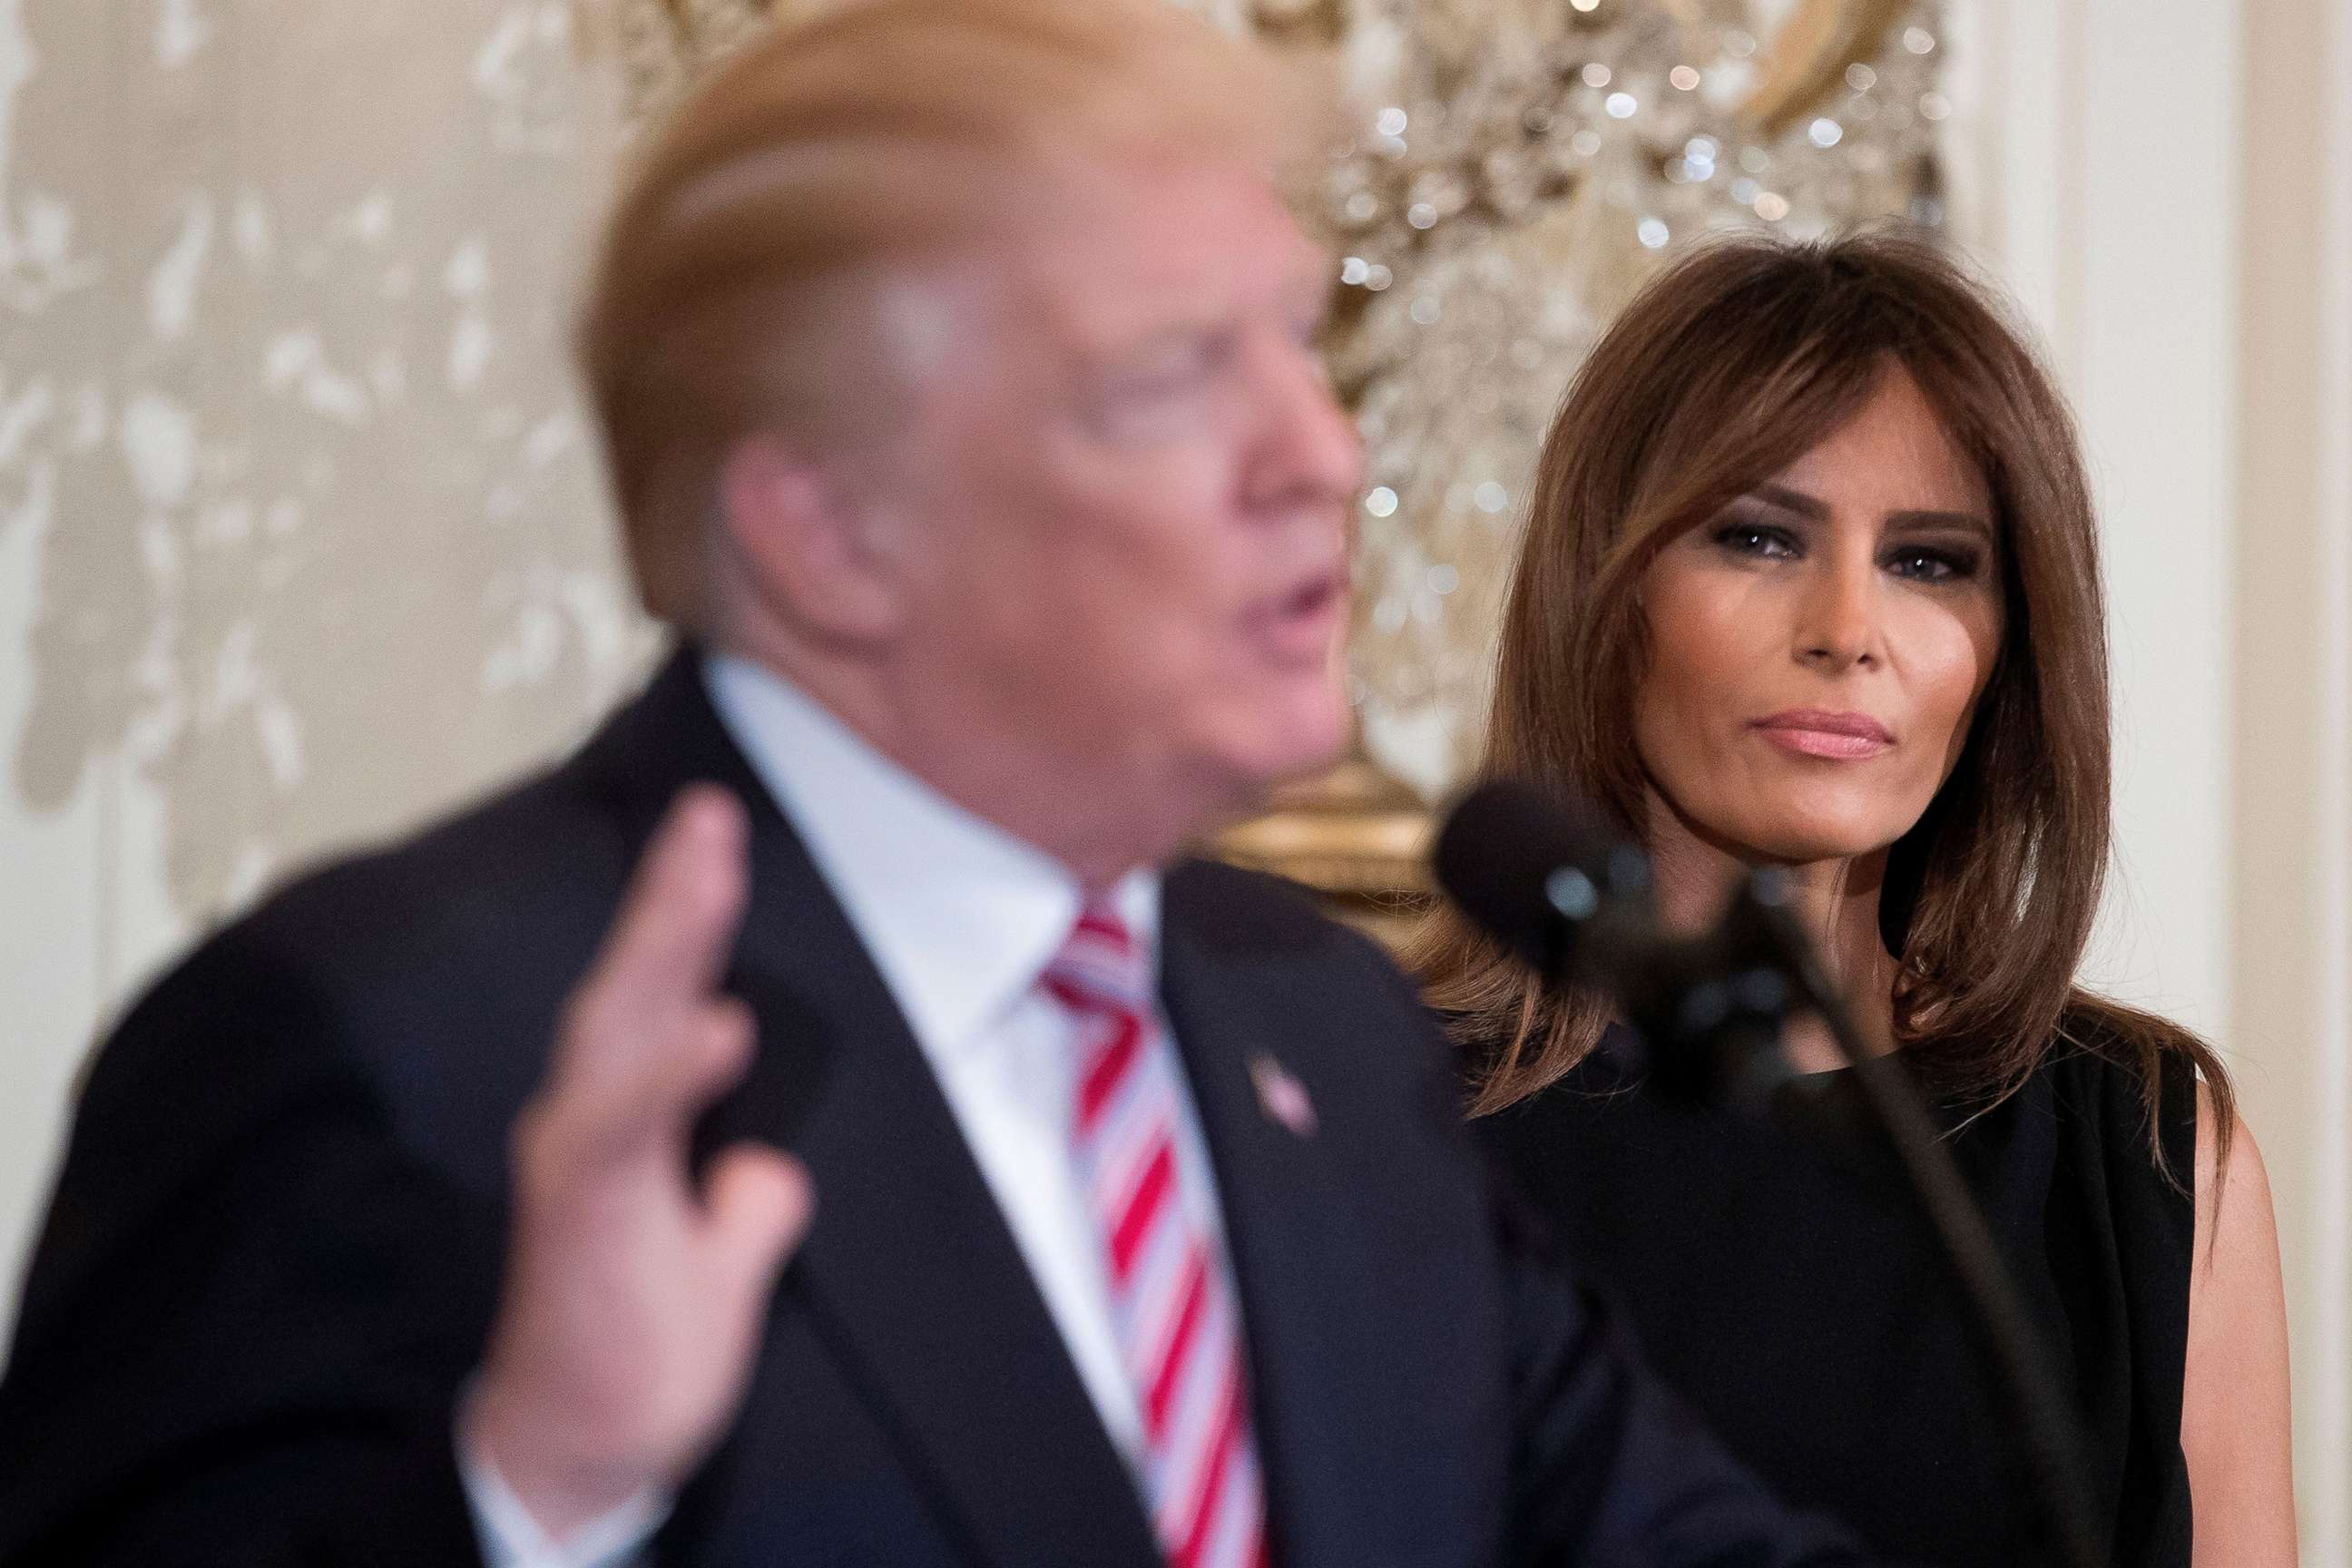 PHOTO: Melania Trump listens to President Donald J. Trump delivers remarks while hosting a reception in honor of National African American History Month, in the East Room of the White House, Feb. 13, 2018.